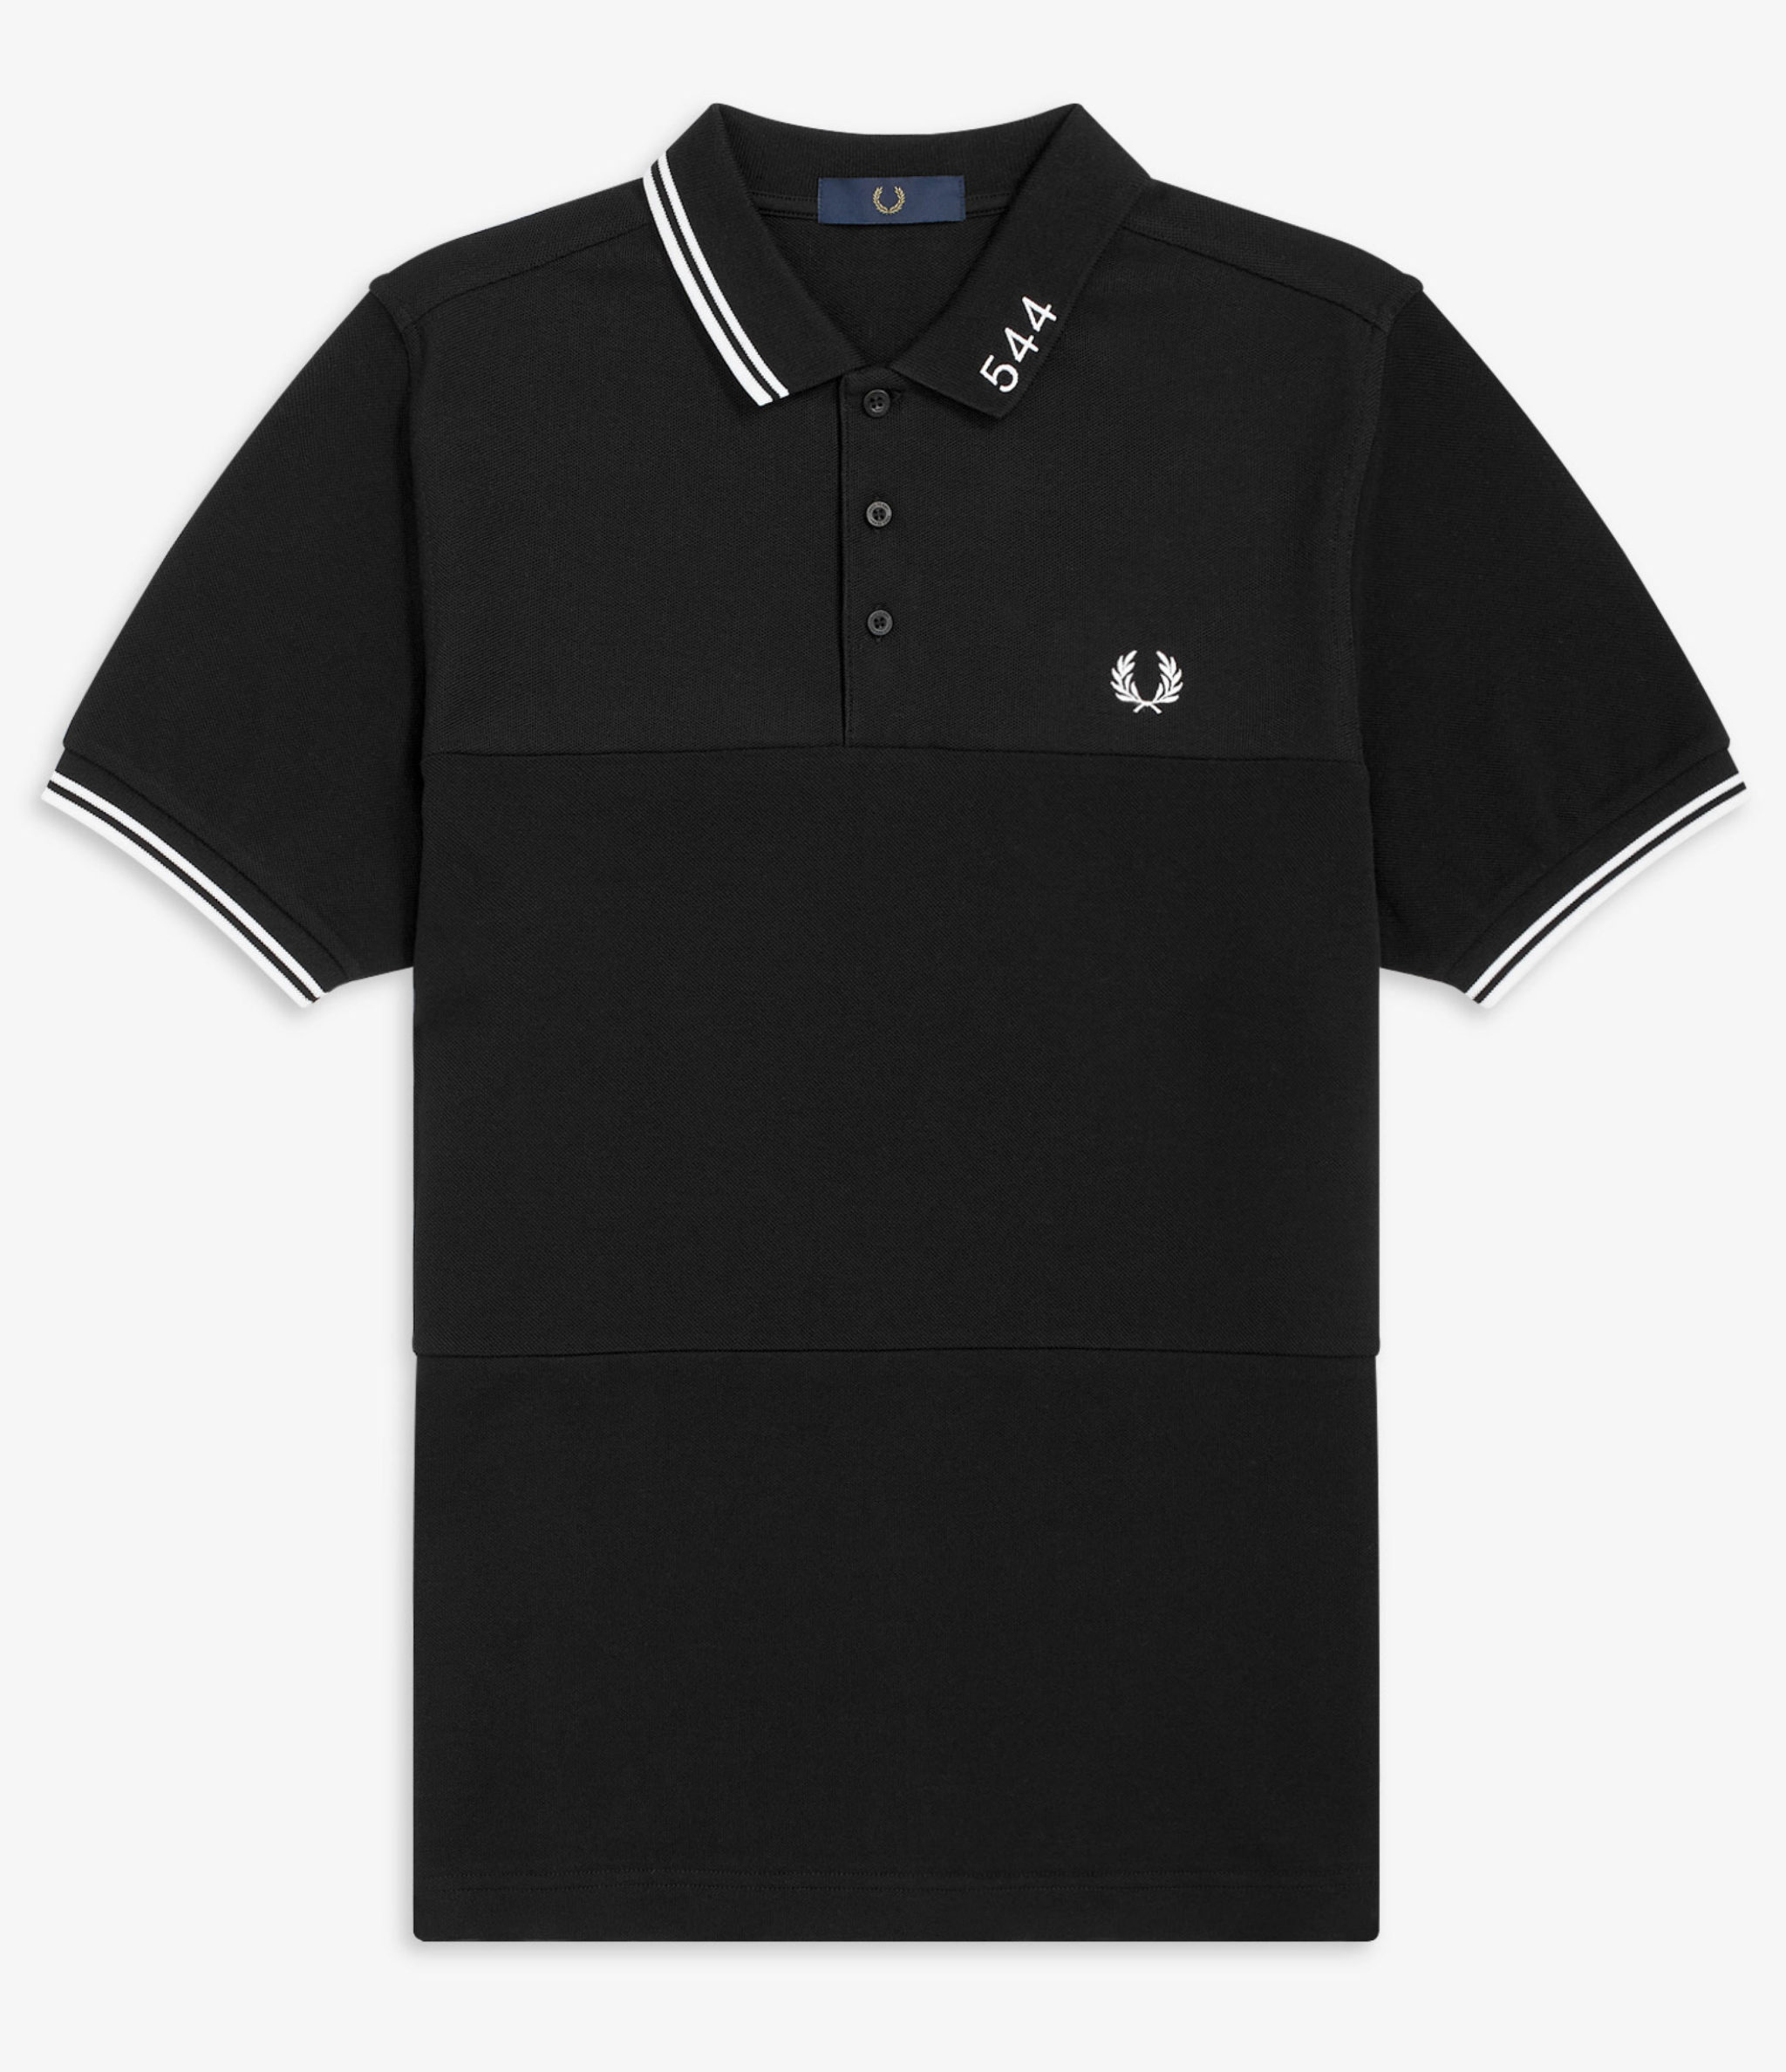 MADE THOUGHT – Made Thought x Fred Perry 5-4-4 Luxury Capsule Collection